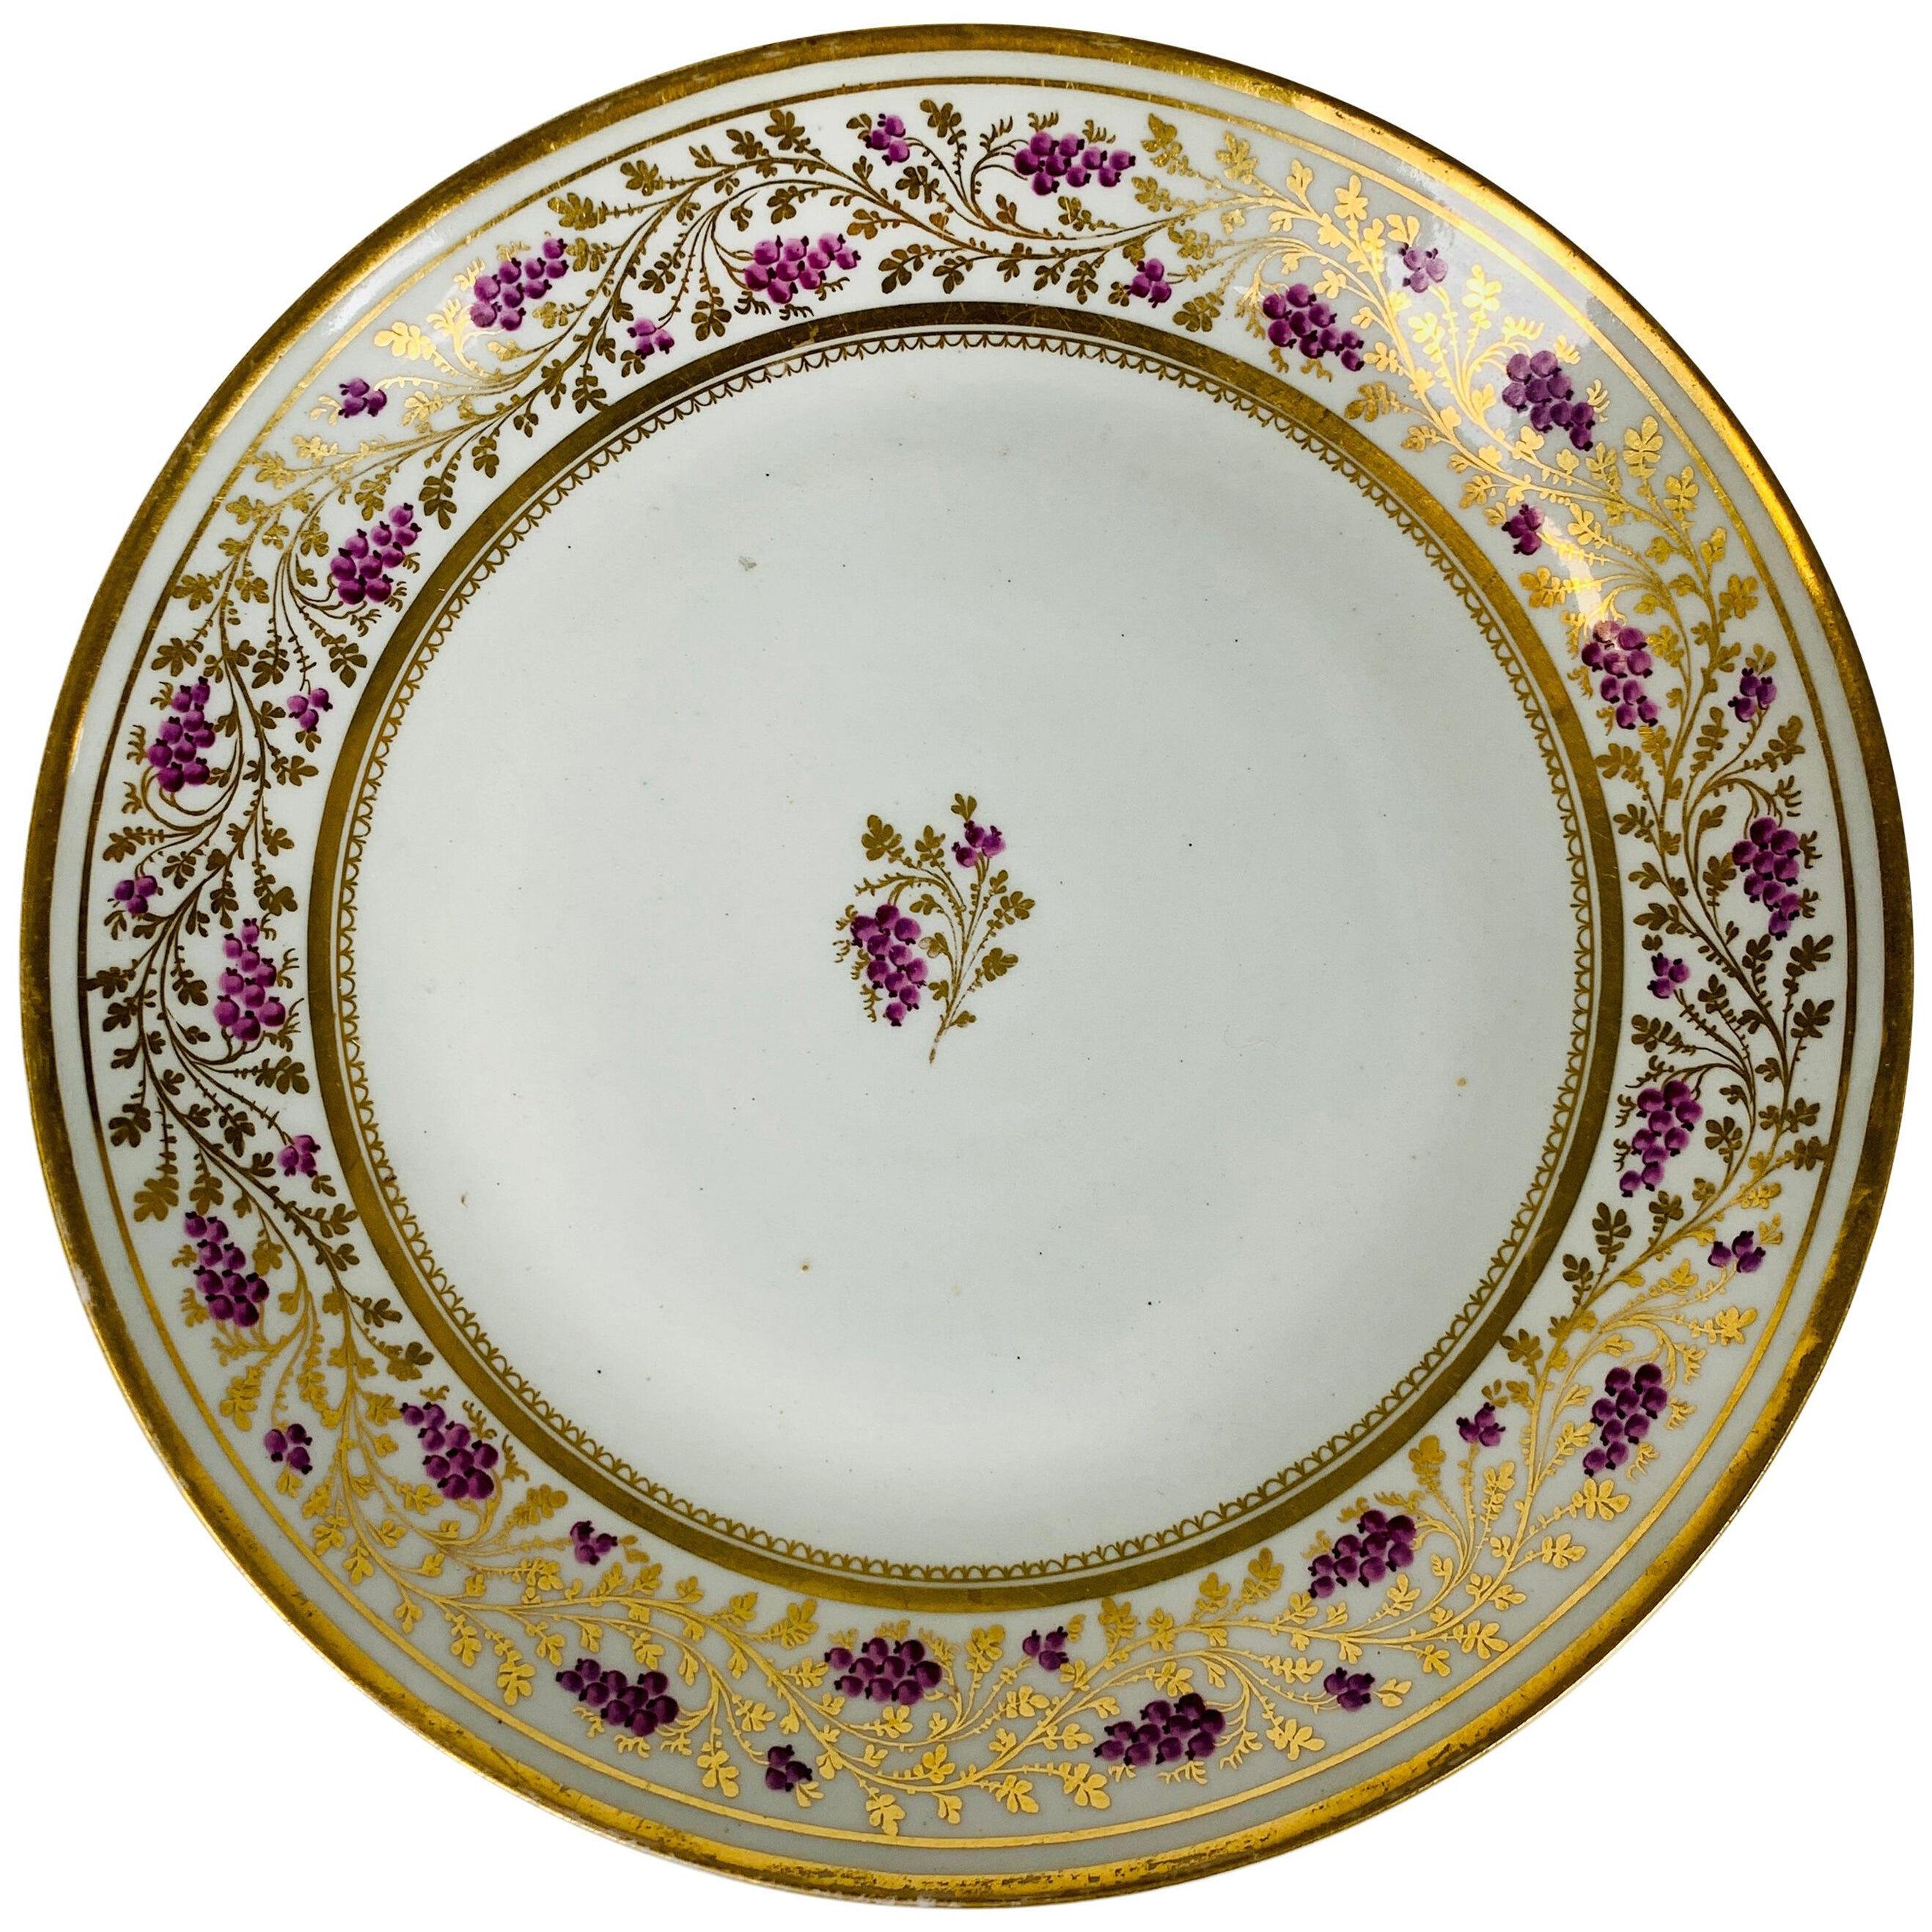 From the Collection of Mario Buatta a New Hall Saucer Dish Made England c-1810